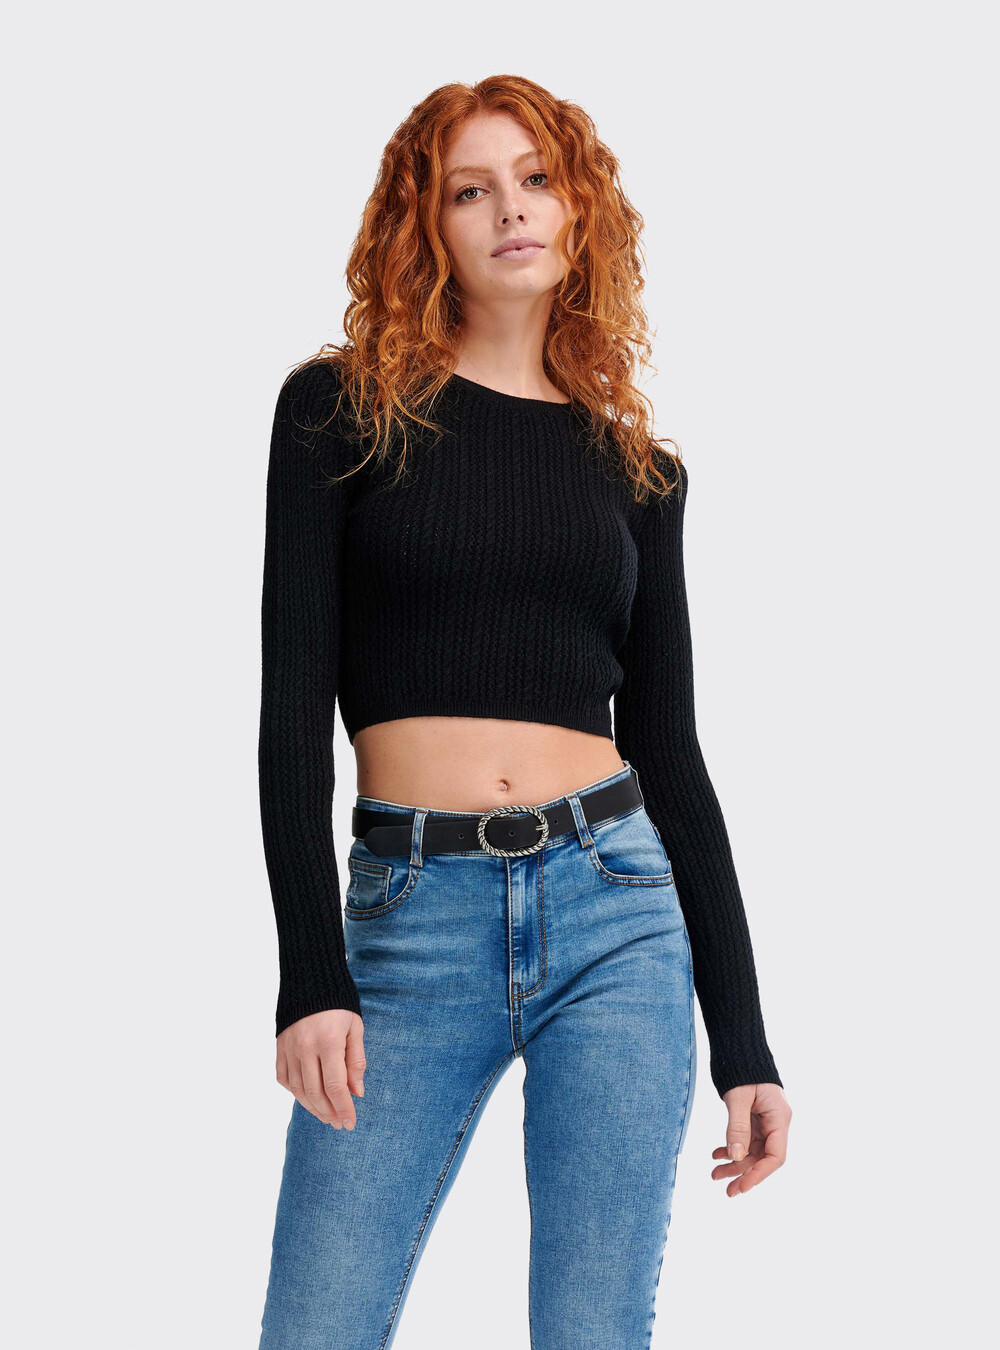 Cropped t-shirt with long sleeves.